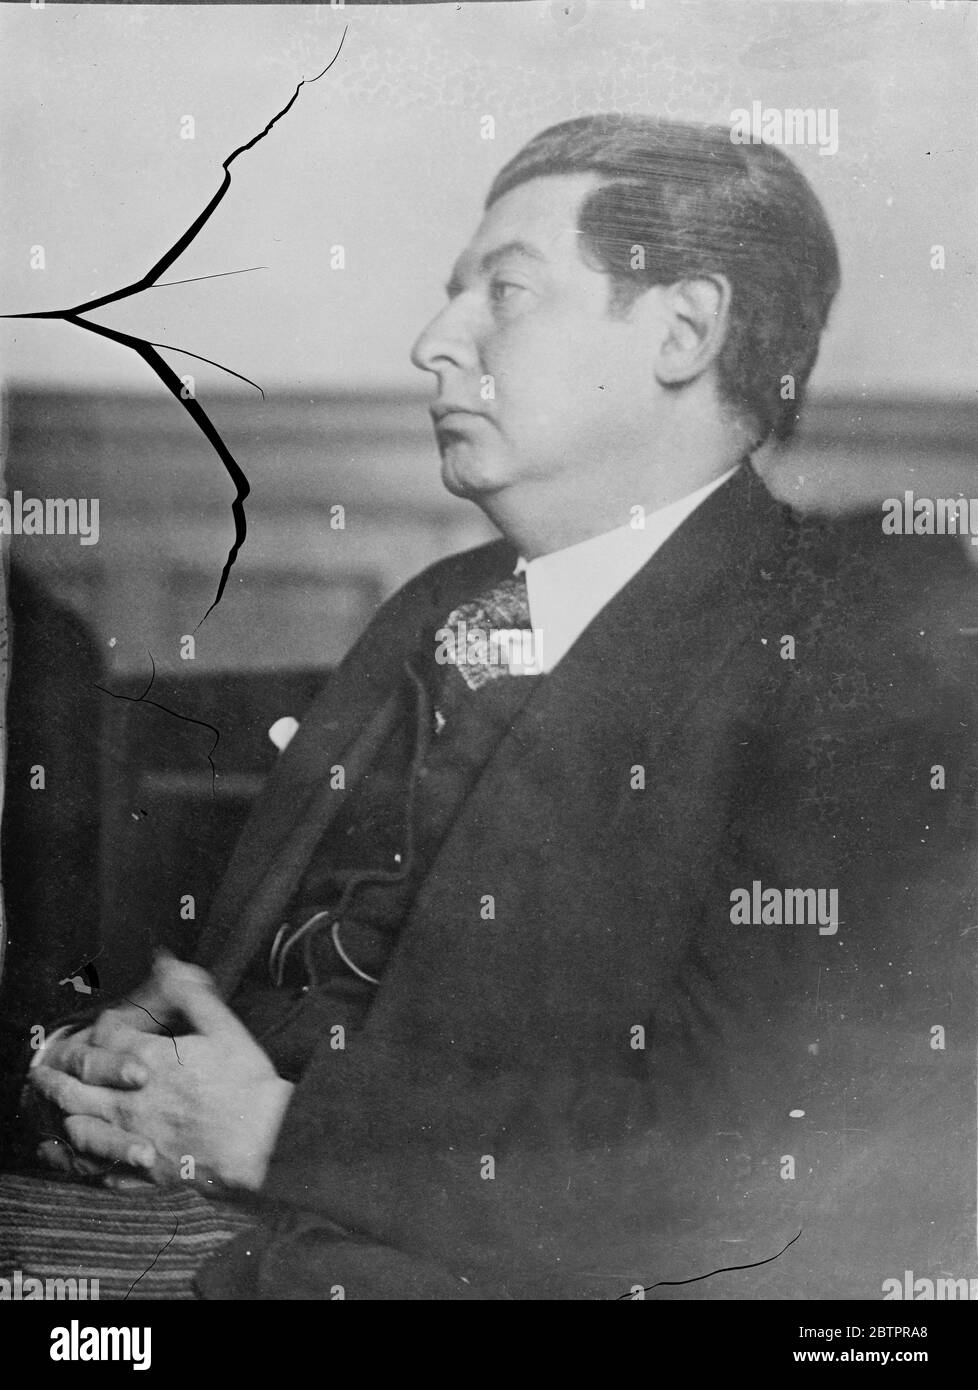 Extradition proceedings against Al Capone. Extradition proceedings have been taken in the Vienna Courts against Heinrich Eduard Jacob, said to have been an accomplice of Al Capone, the American gangster. Photo shows, Heinrich Jacob during the proceedings in the Vienna. 10 January 1938 Stock Photo